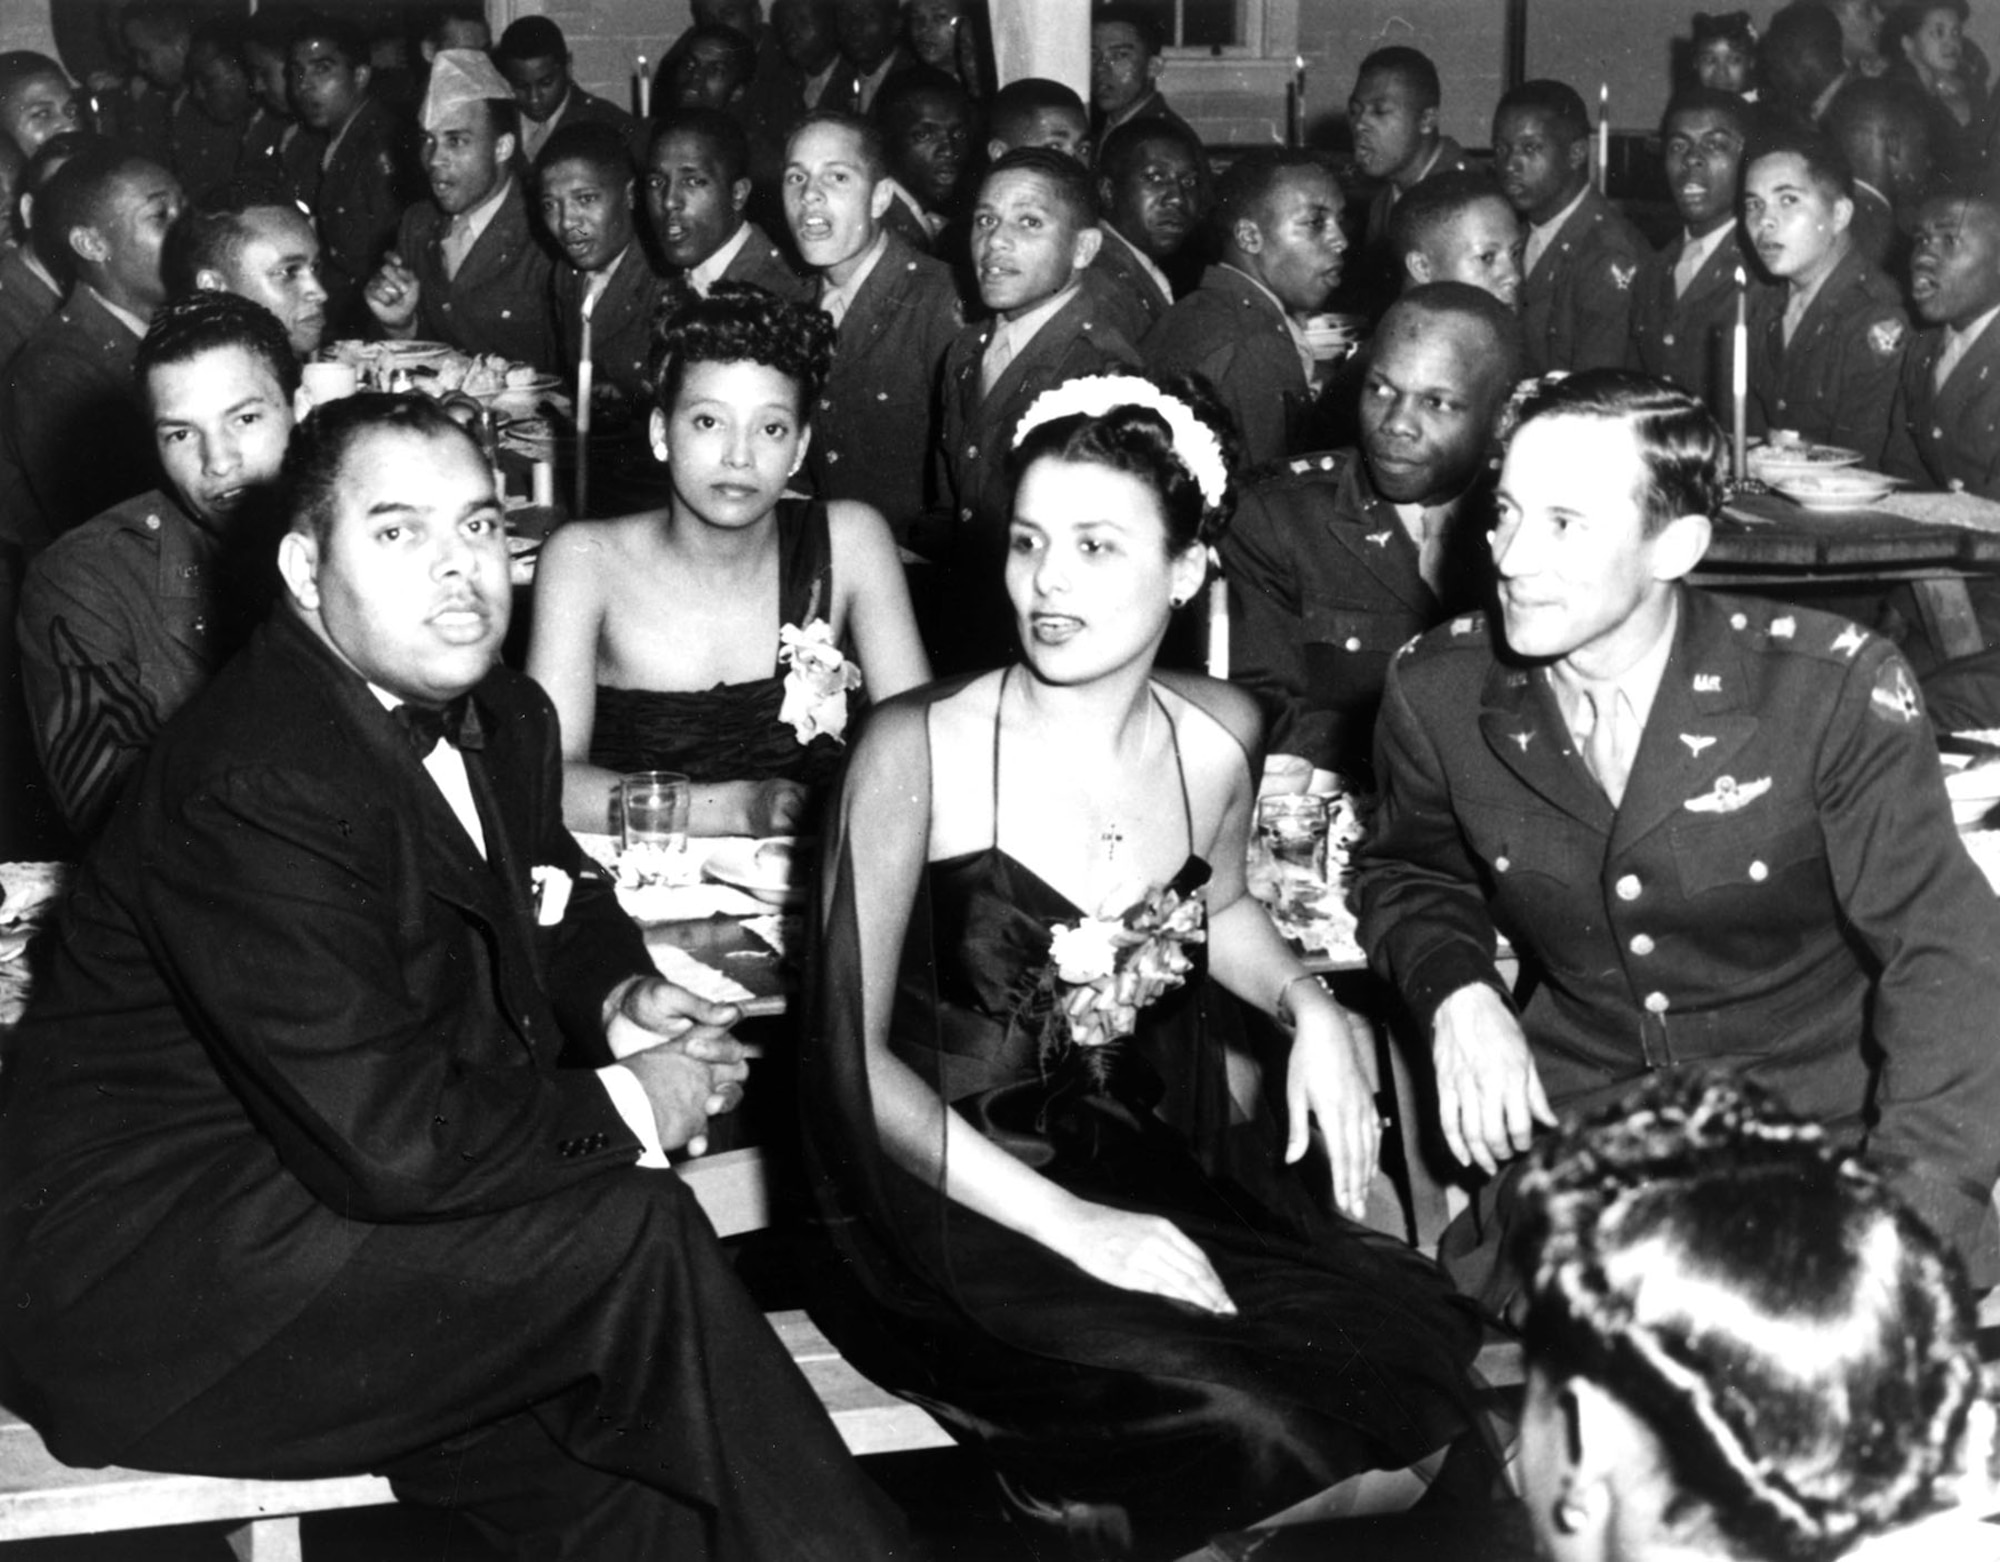 Tuskegee Airmen became heroes to the black community. Here, singer Lena Horne (center), one of their best known supporters, visits Tuskegee aviation cadets. Col. Parrish is on her left. (U.S. Air Force photo)